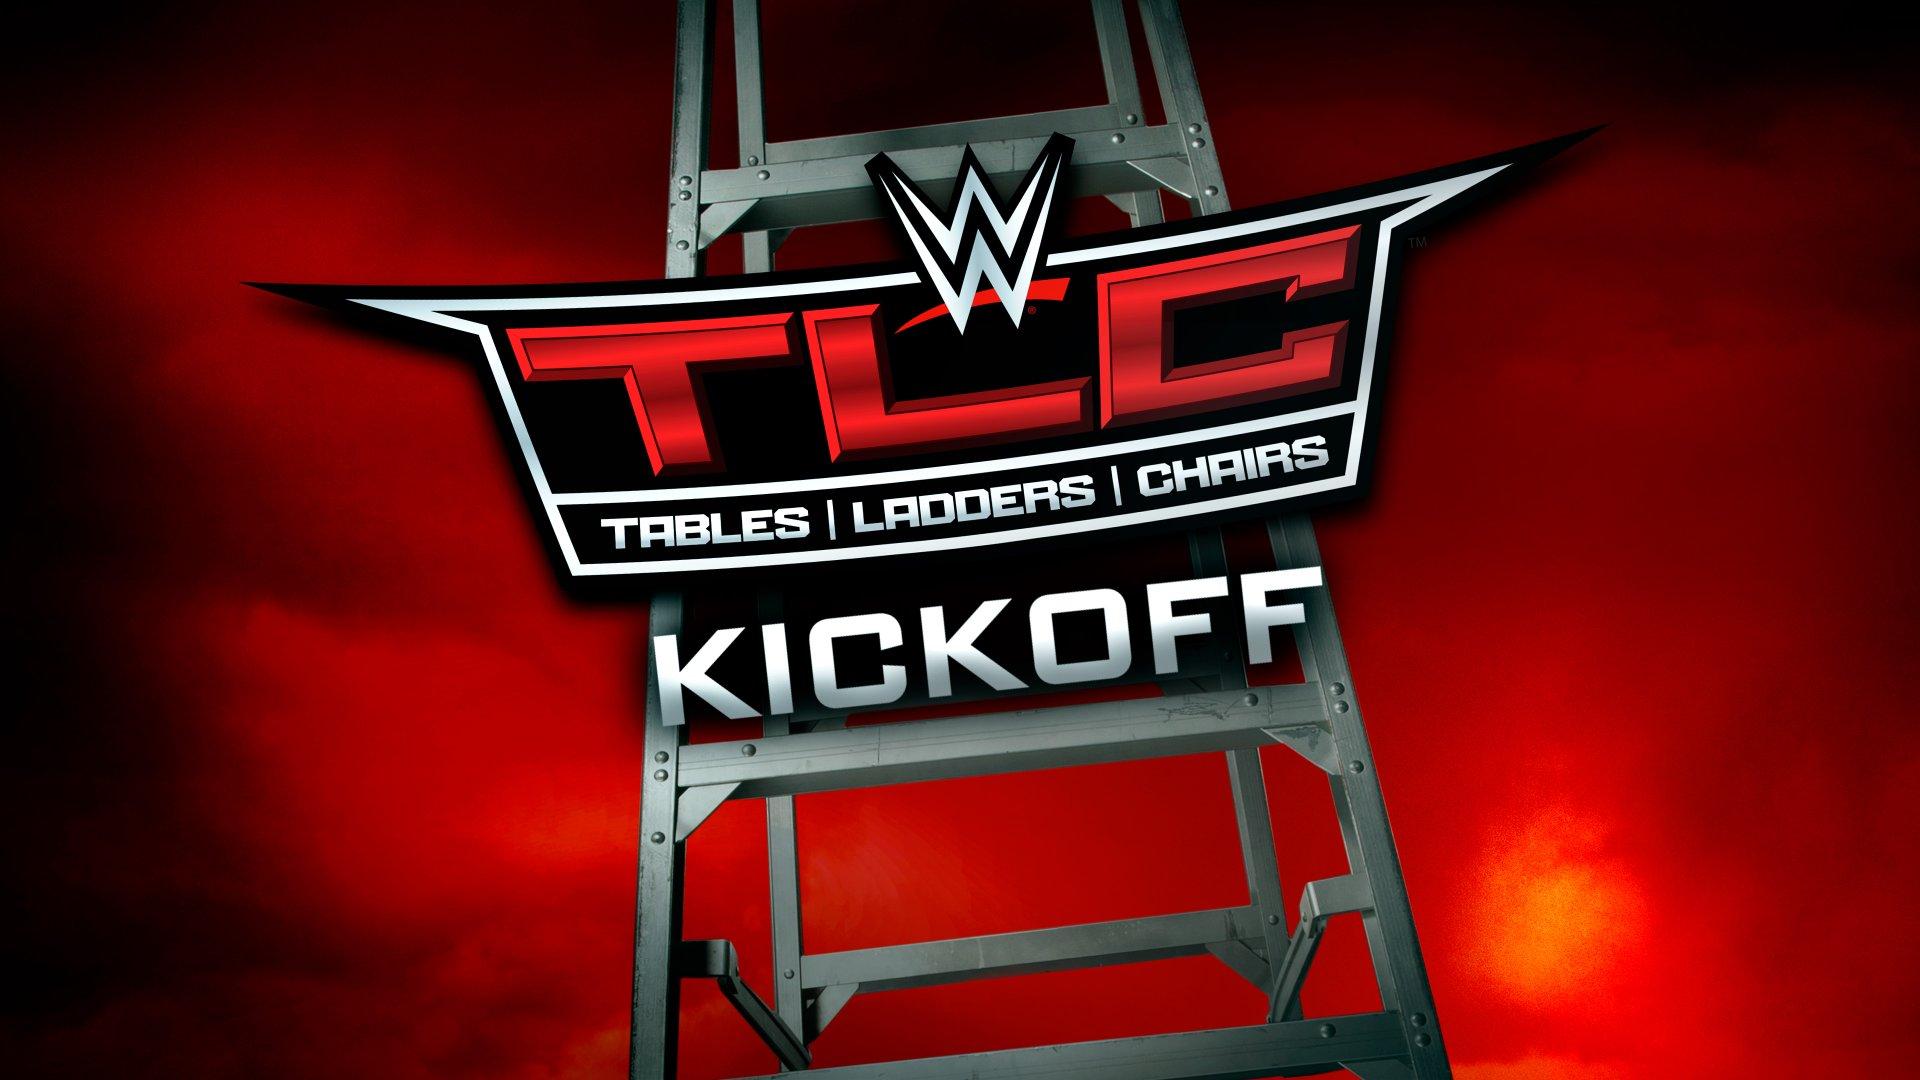 WWE TLC - Tables, Ladders & Chairs 2019 Kickoff